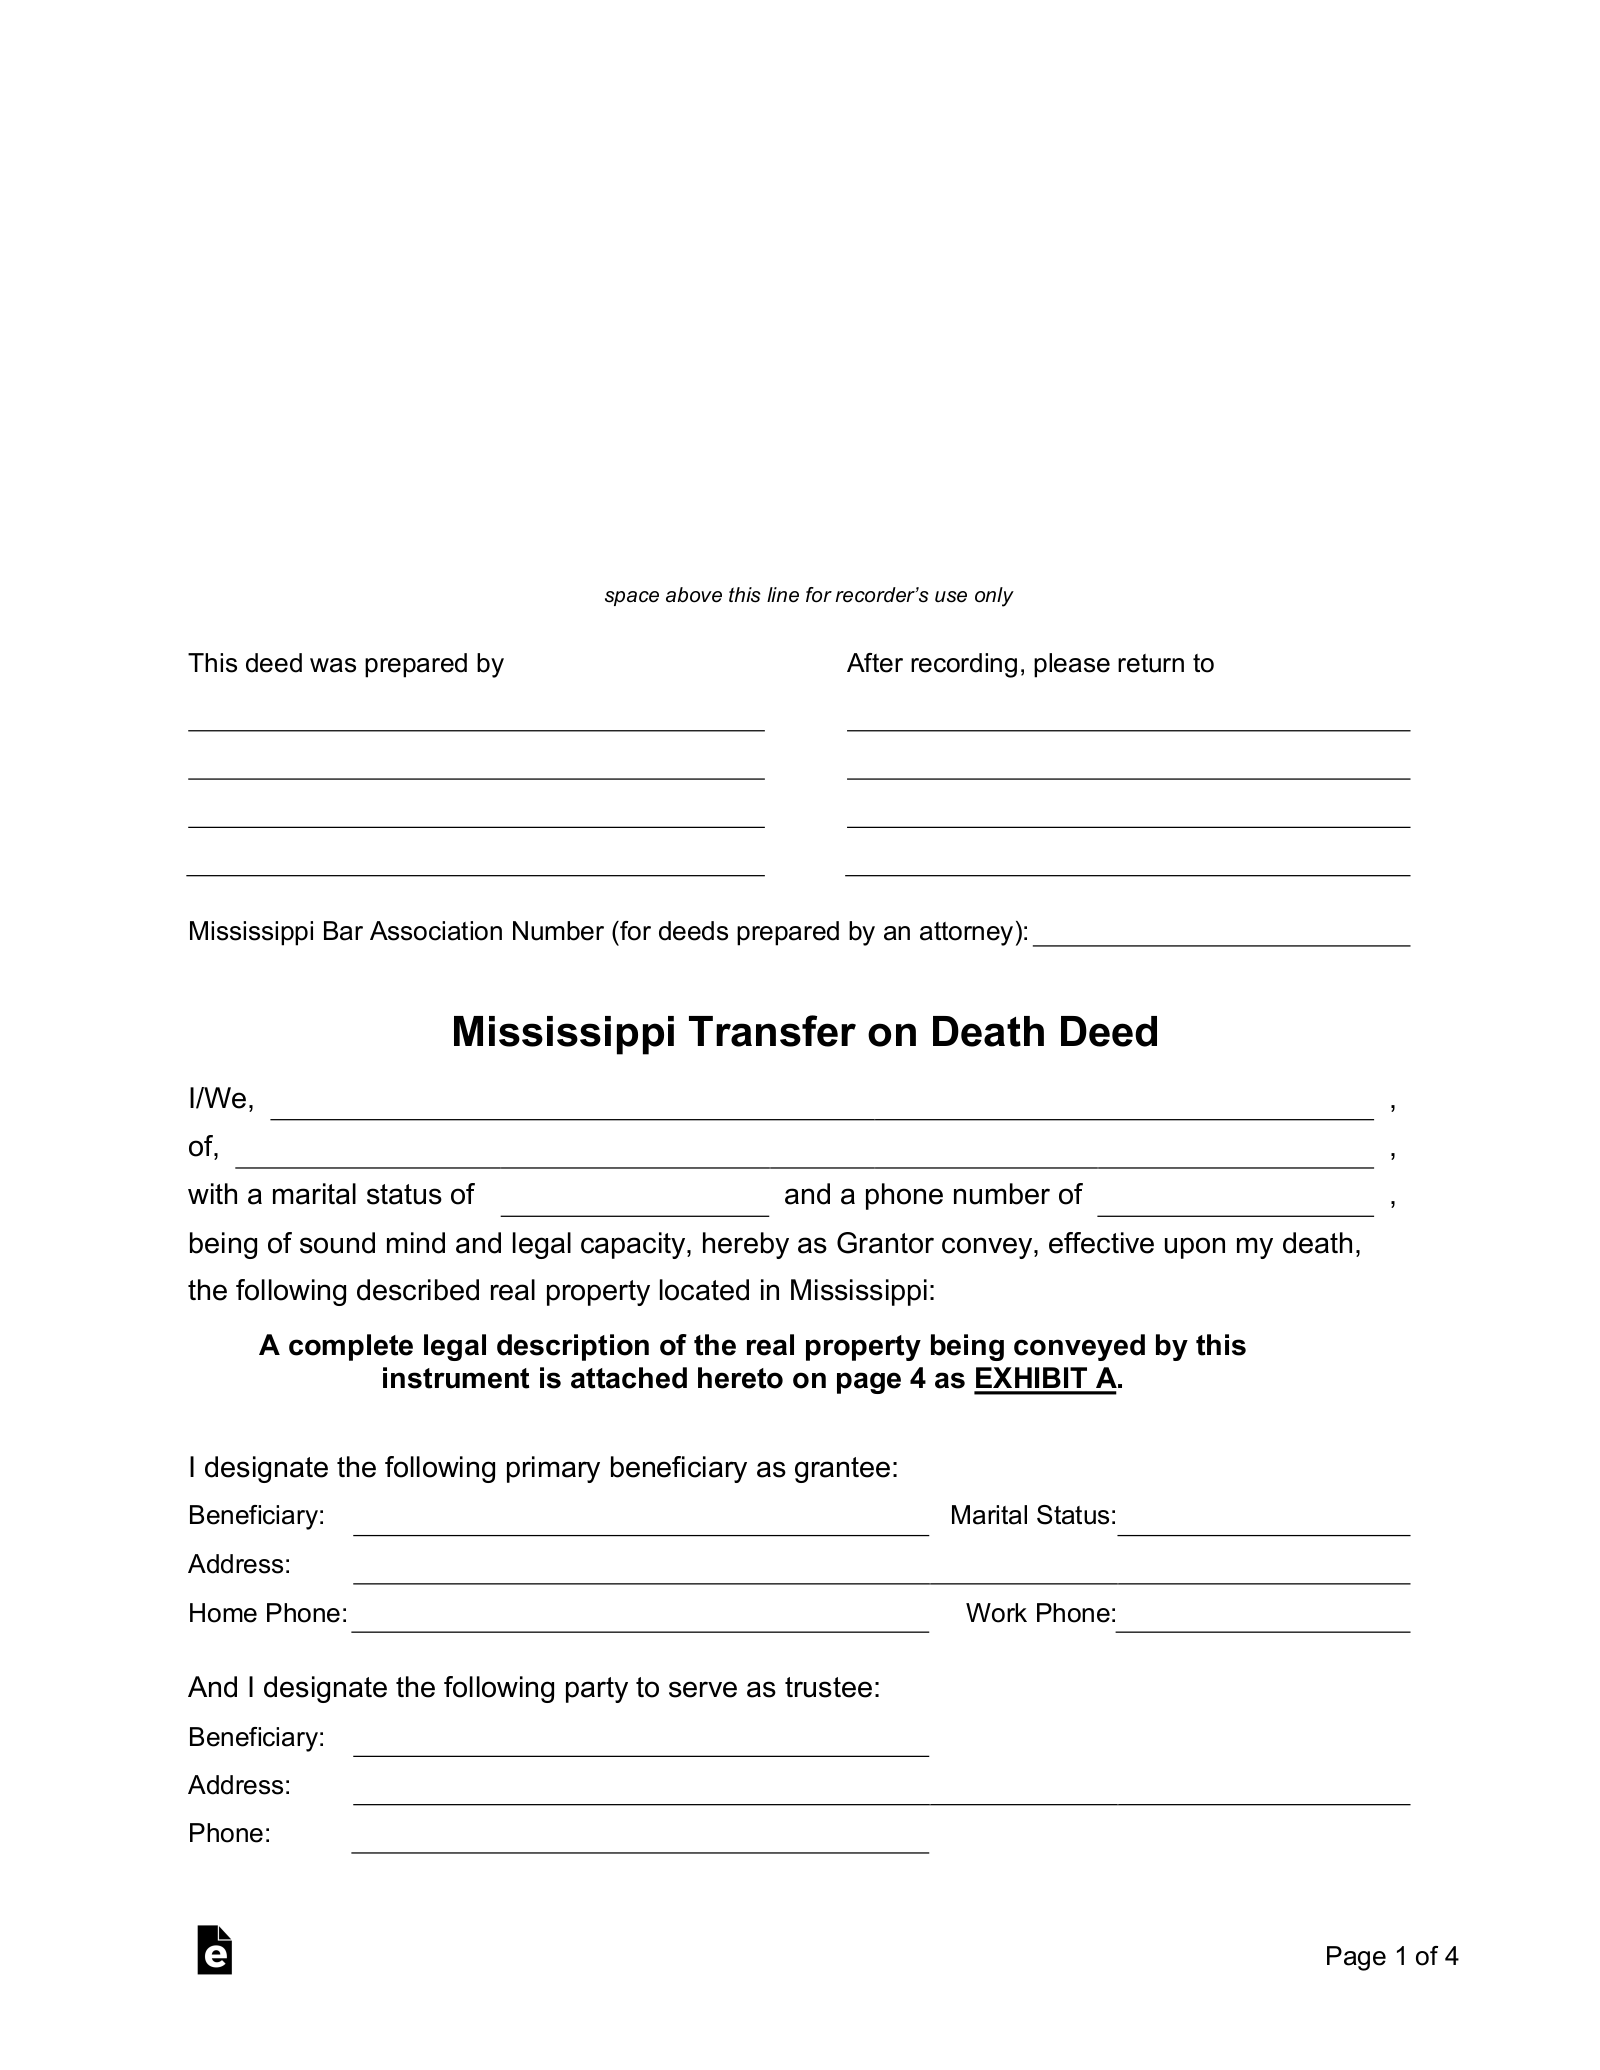 Mississippi Transfer on Death Deed